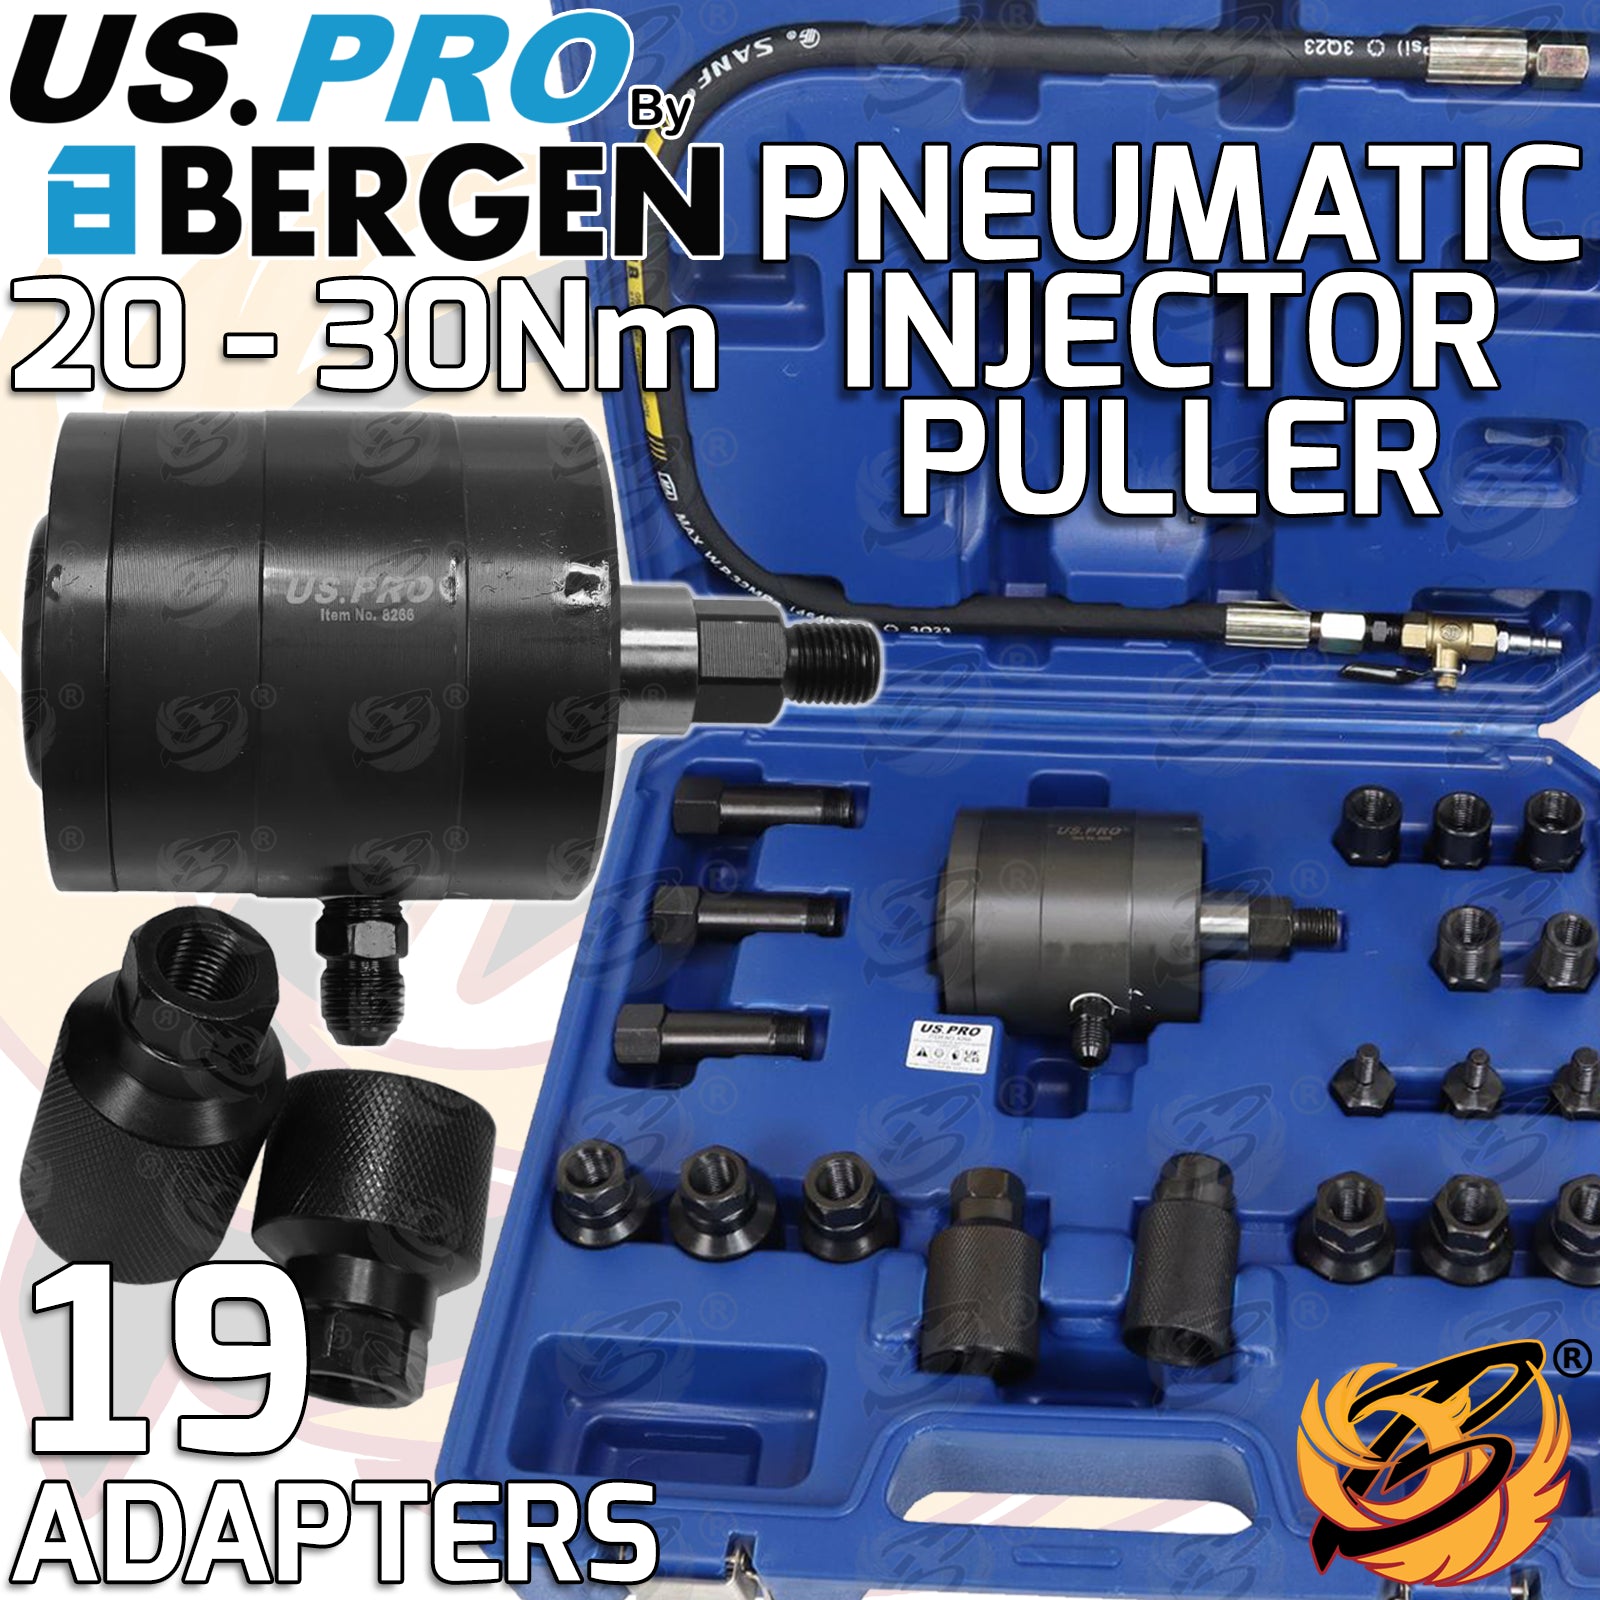 US PRO PNEUMATIC INJECTOR REMOVER ( THE LEGEND )